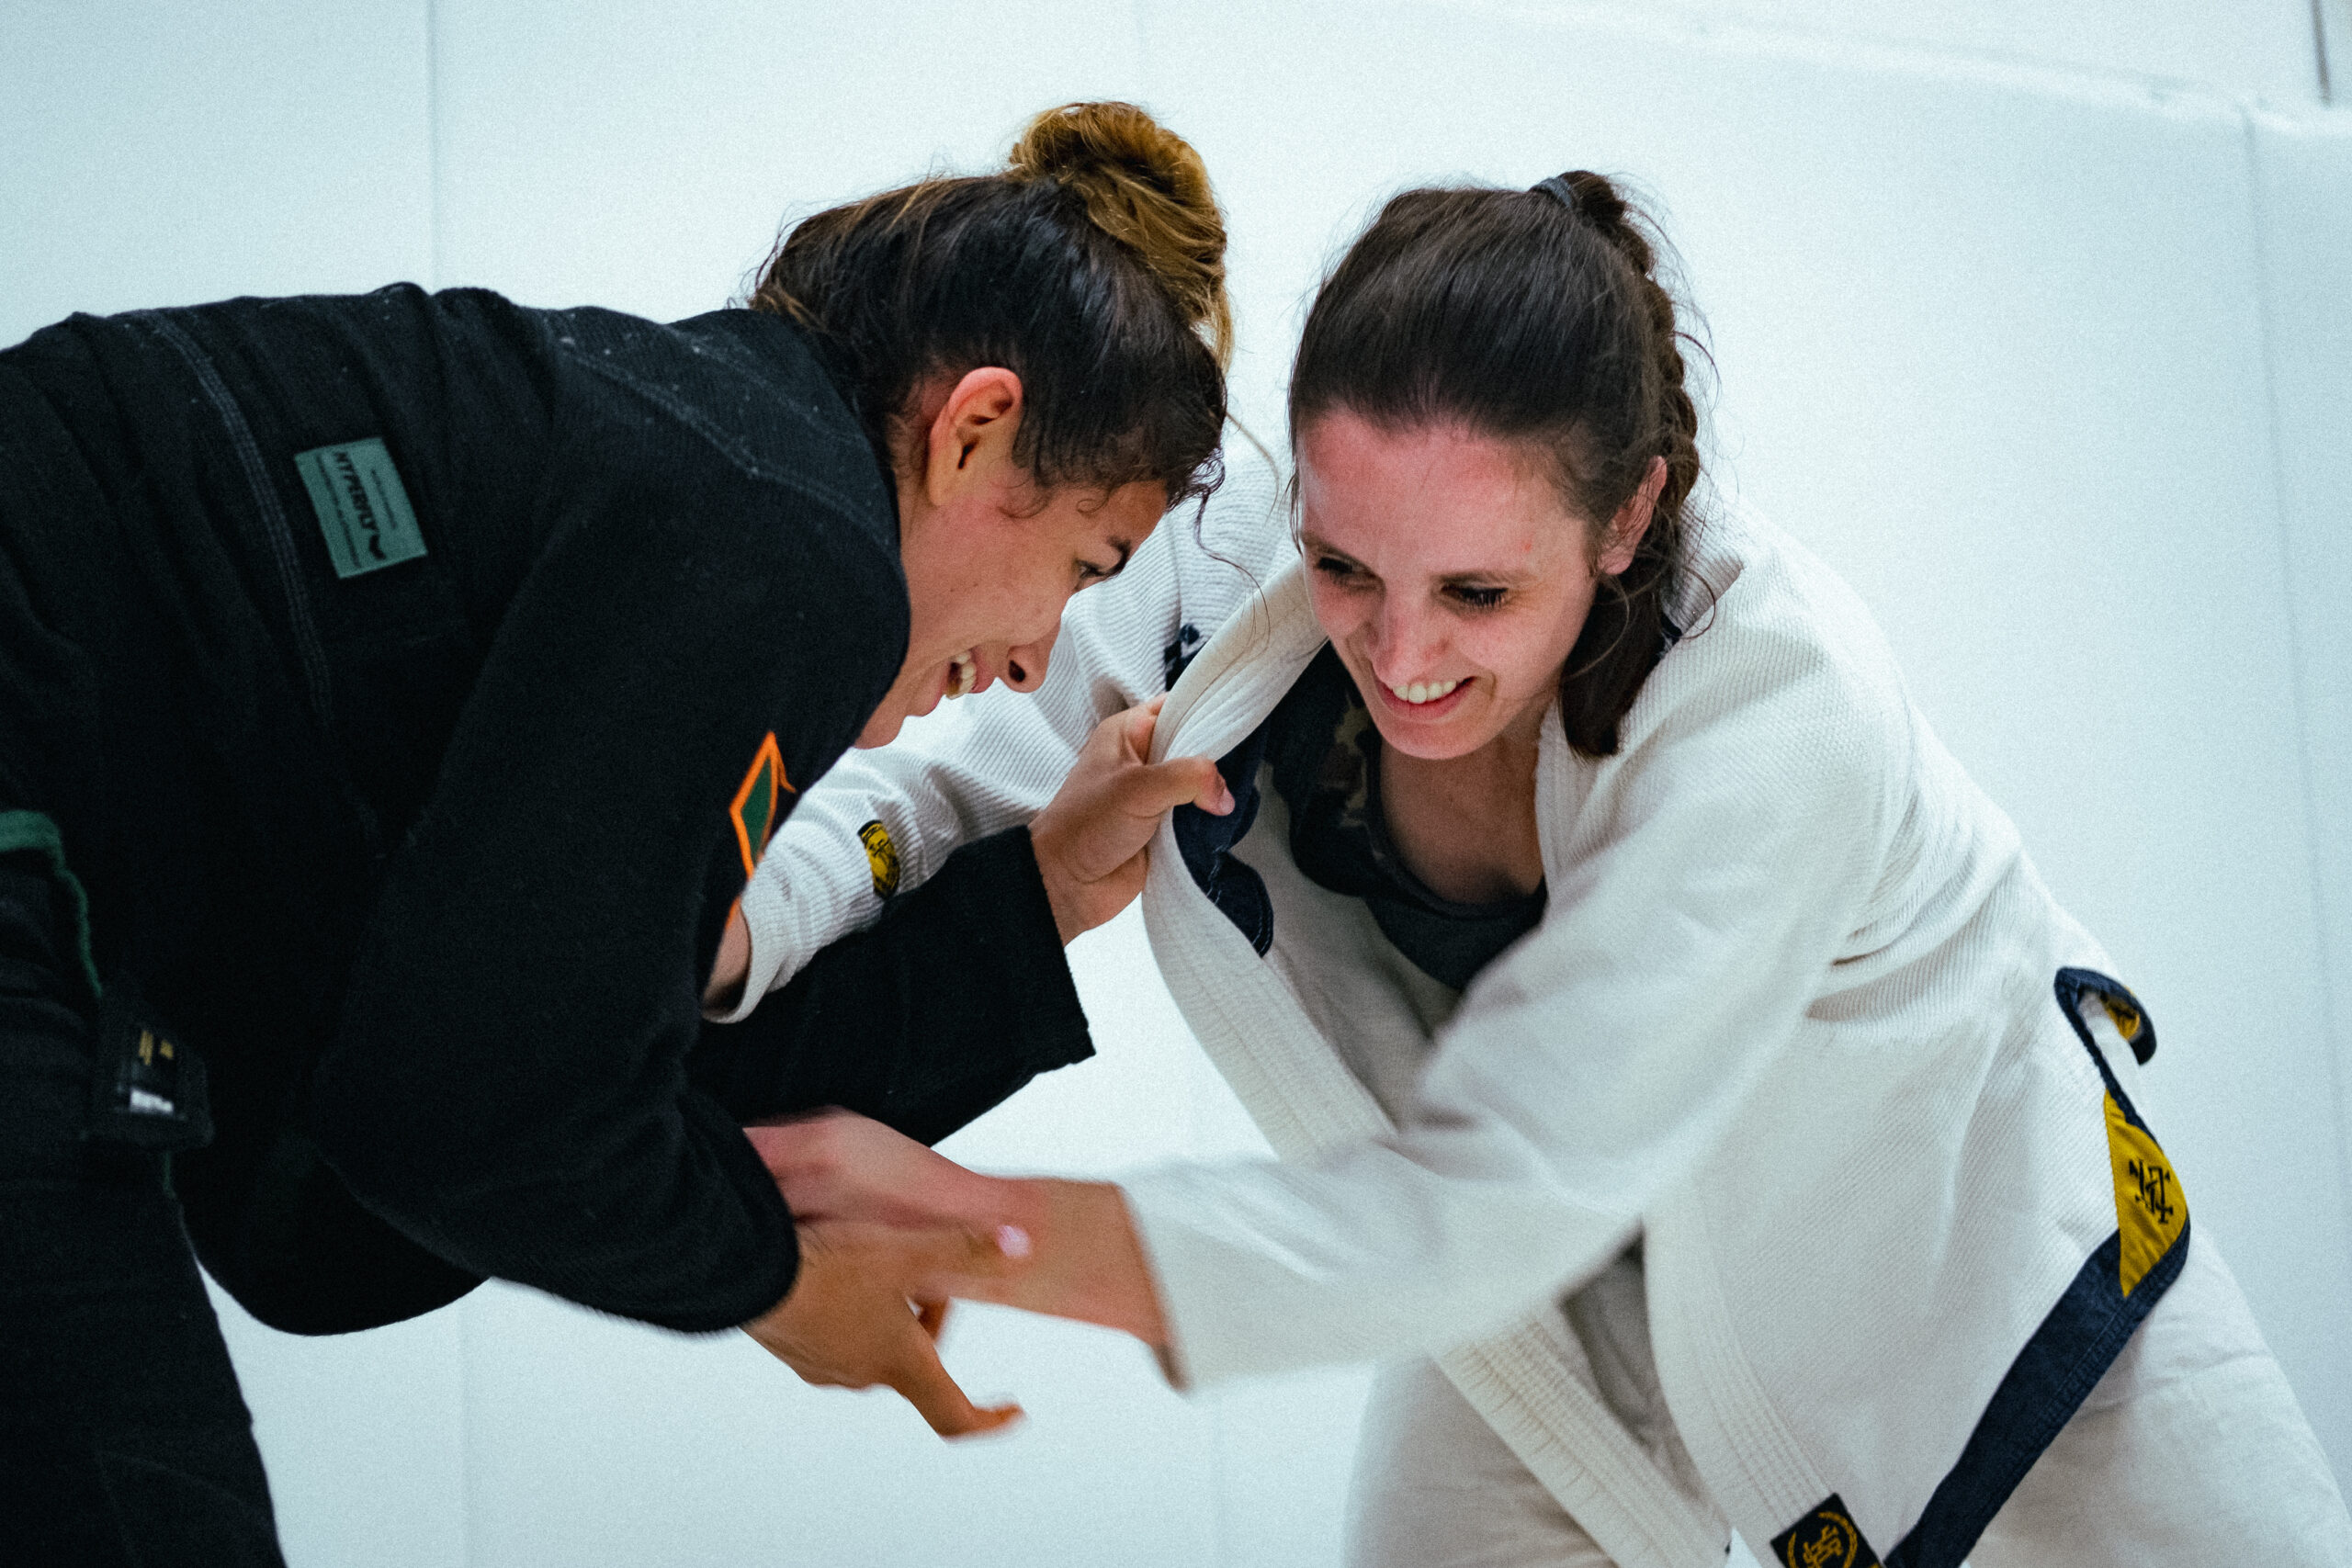 Chelsea and Anna Rodrigues at Escapology BJJ in Cambridge